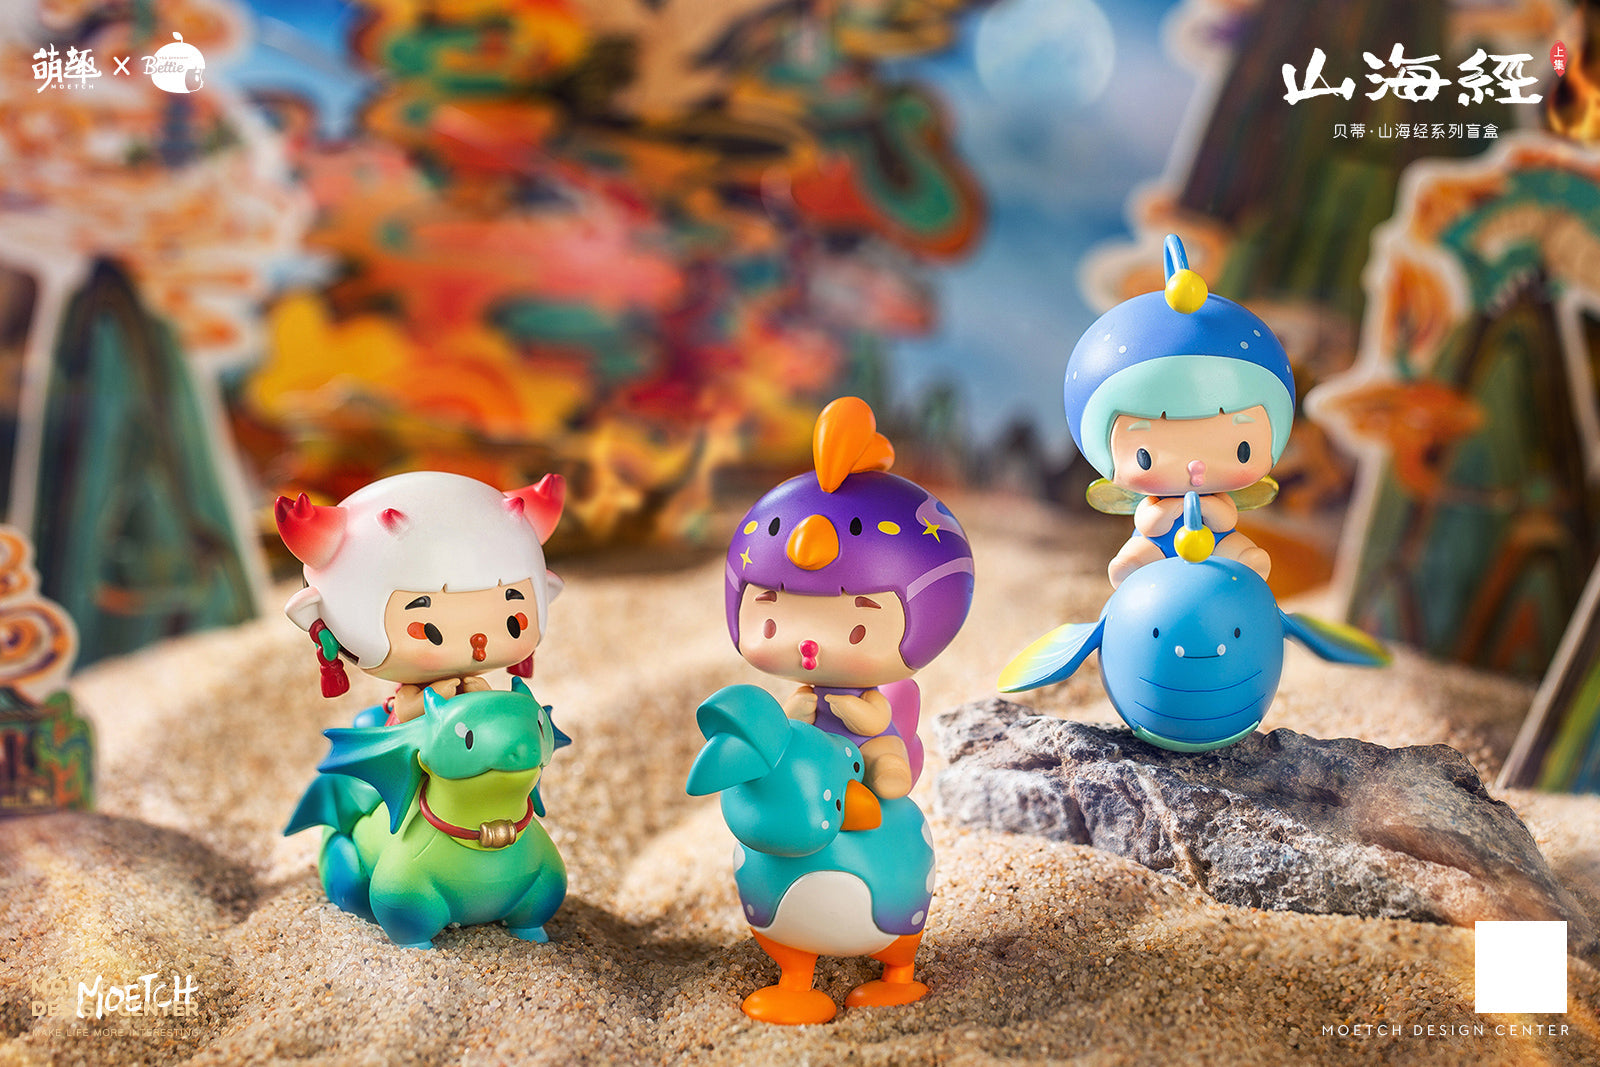 Bettie The Classic of Mountain and Sea Blind Box Series by Yindao Murong x Moetch Toys